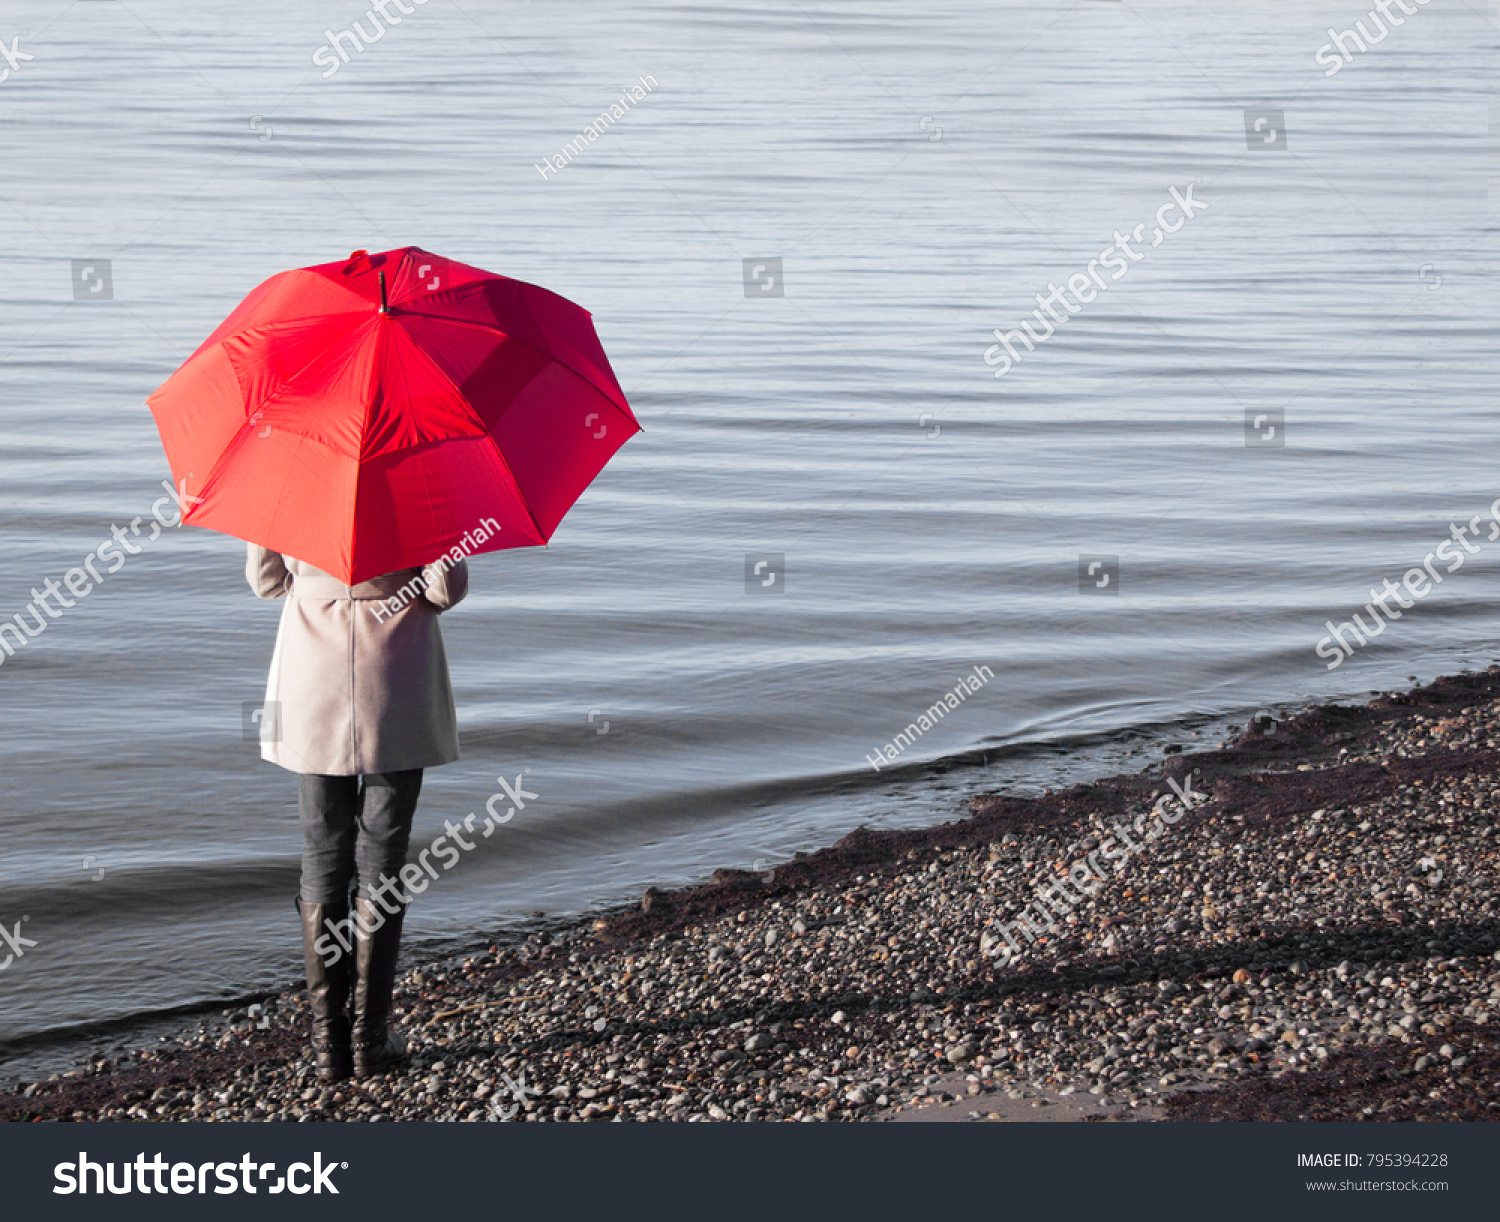 Woman holding a red umbrella walking on a rainy day at a beach.  #795394228